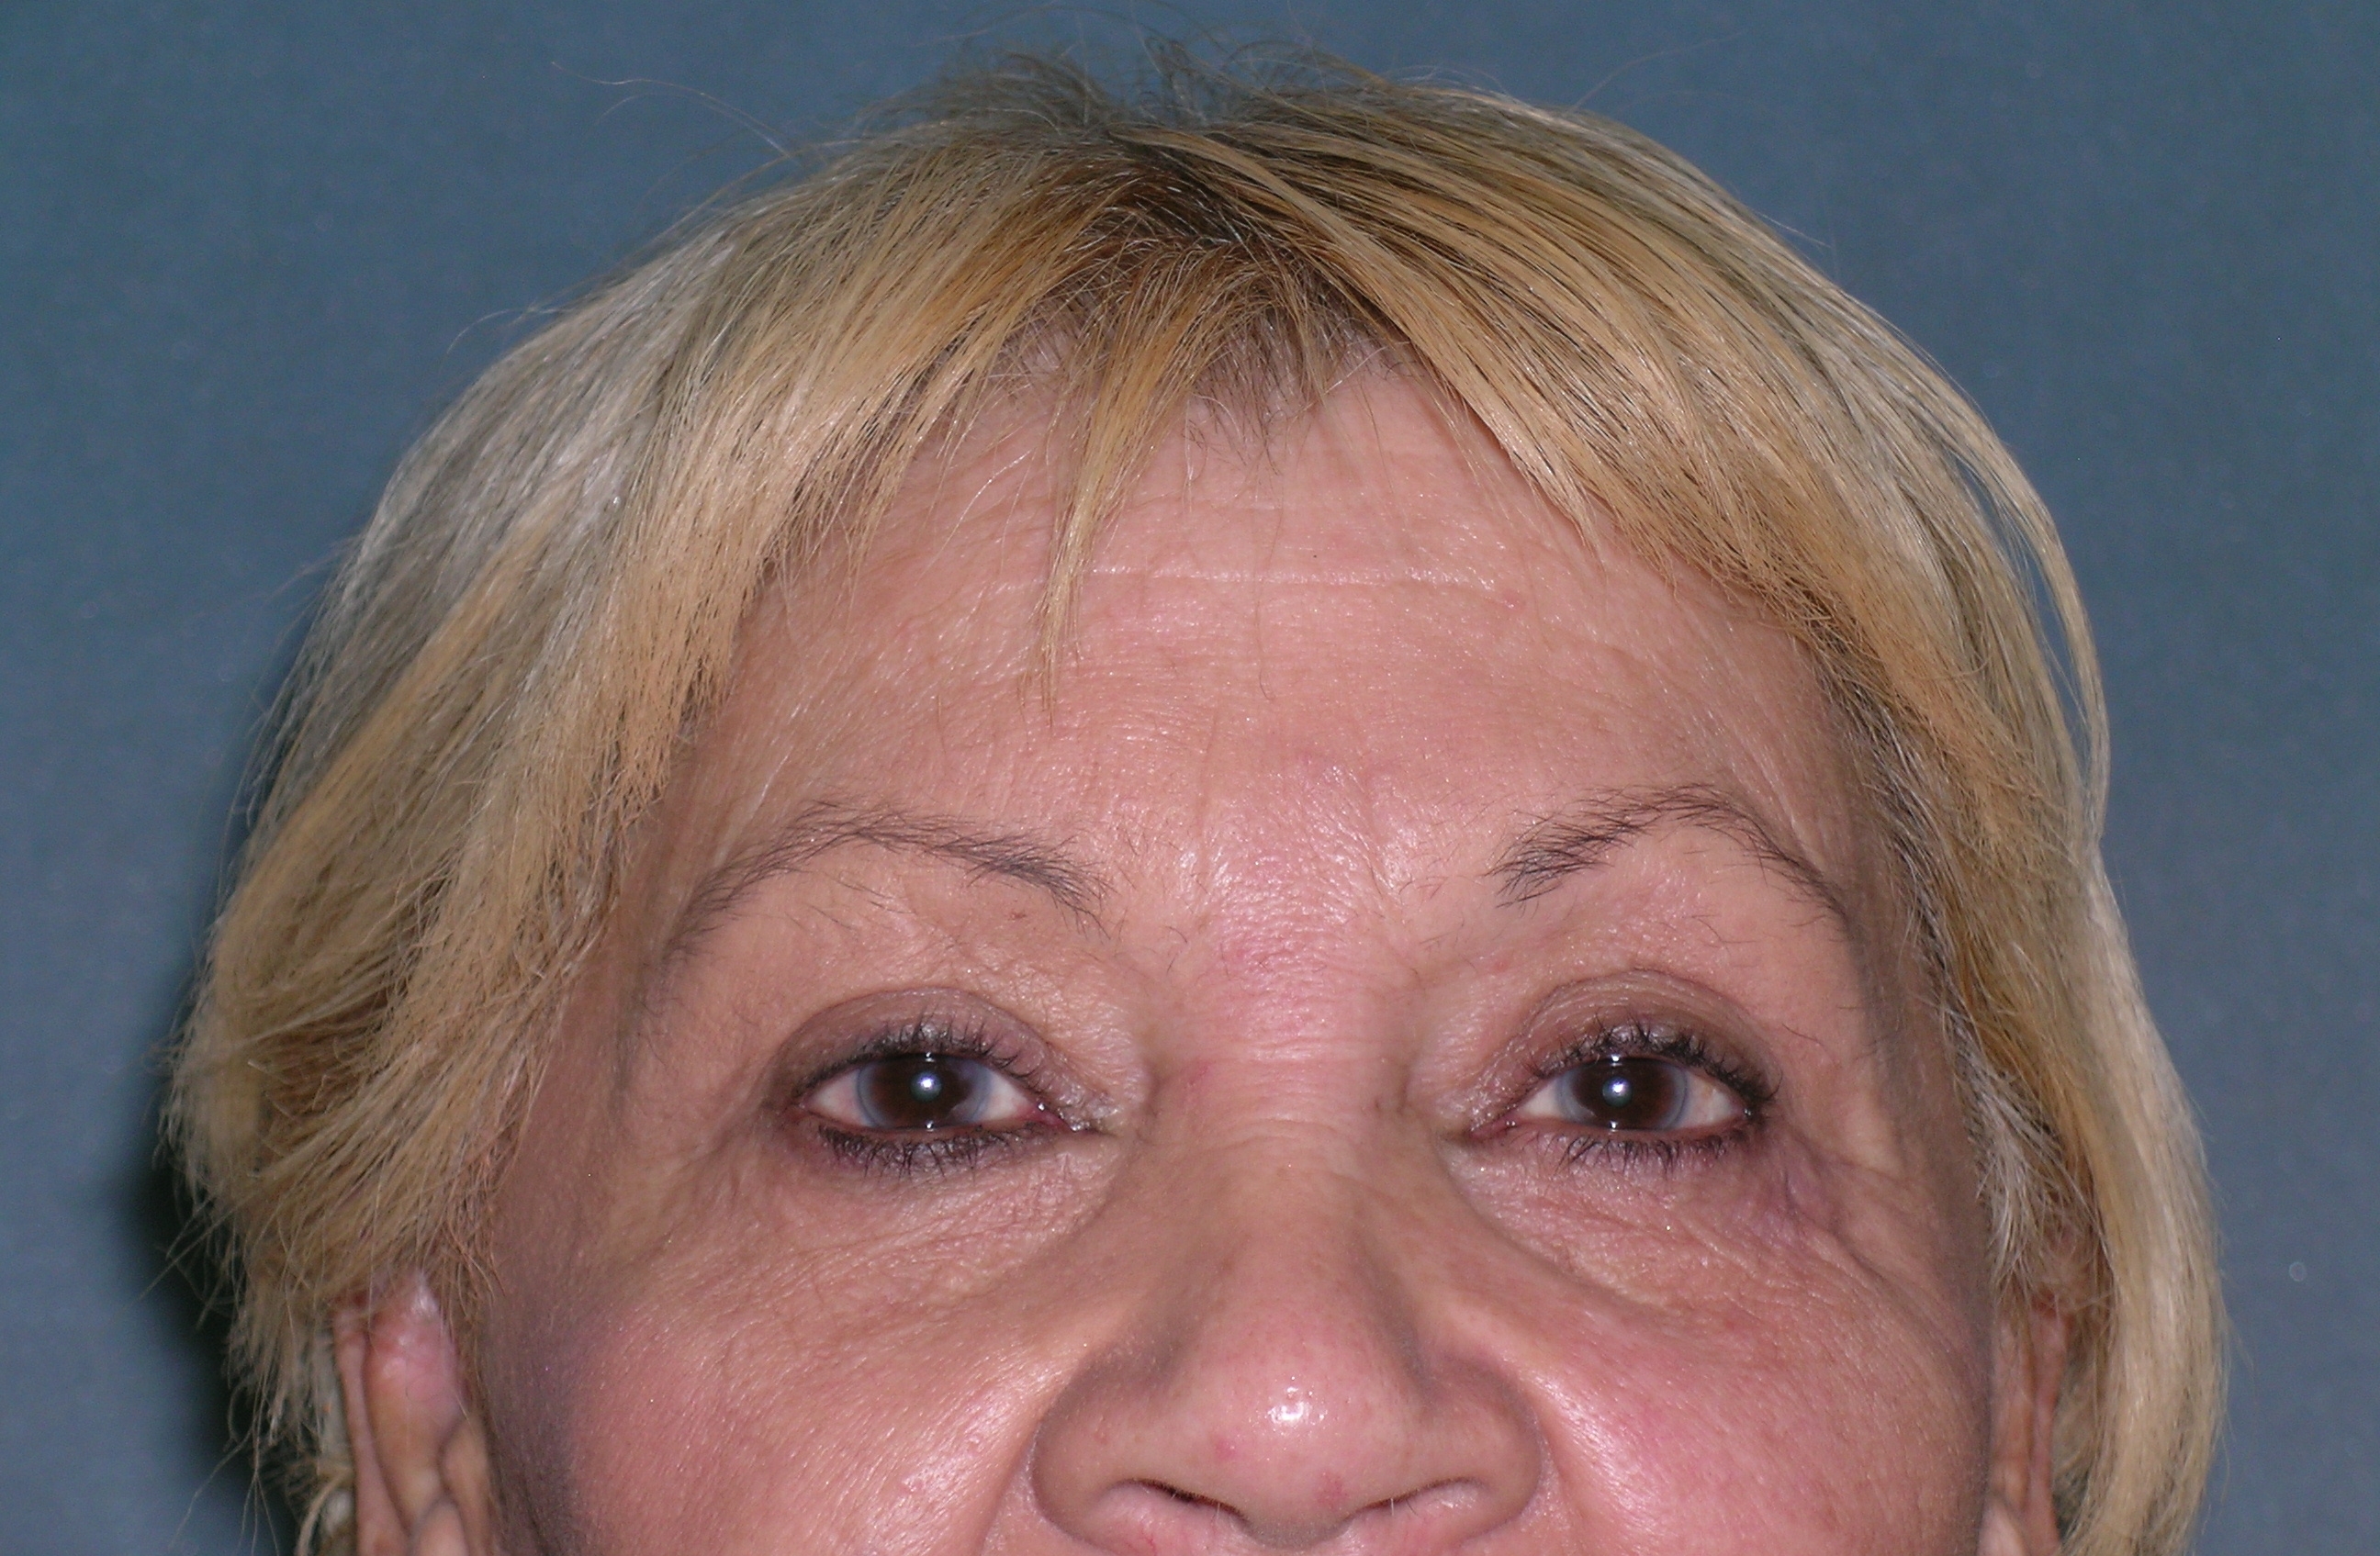 Blepharoplasty Before and After Photos